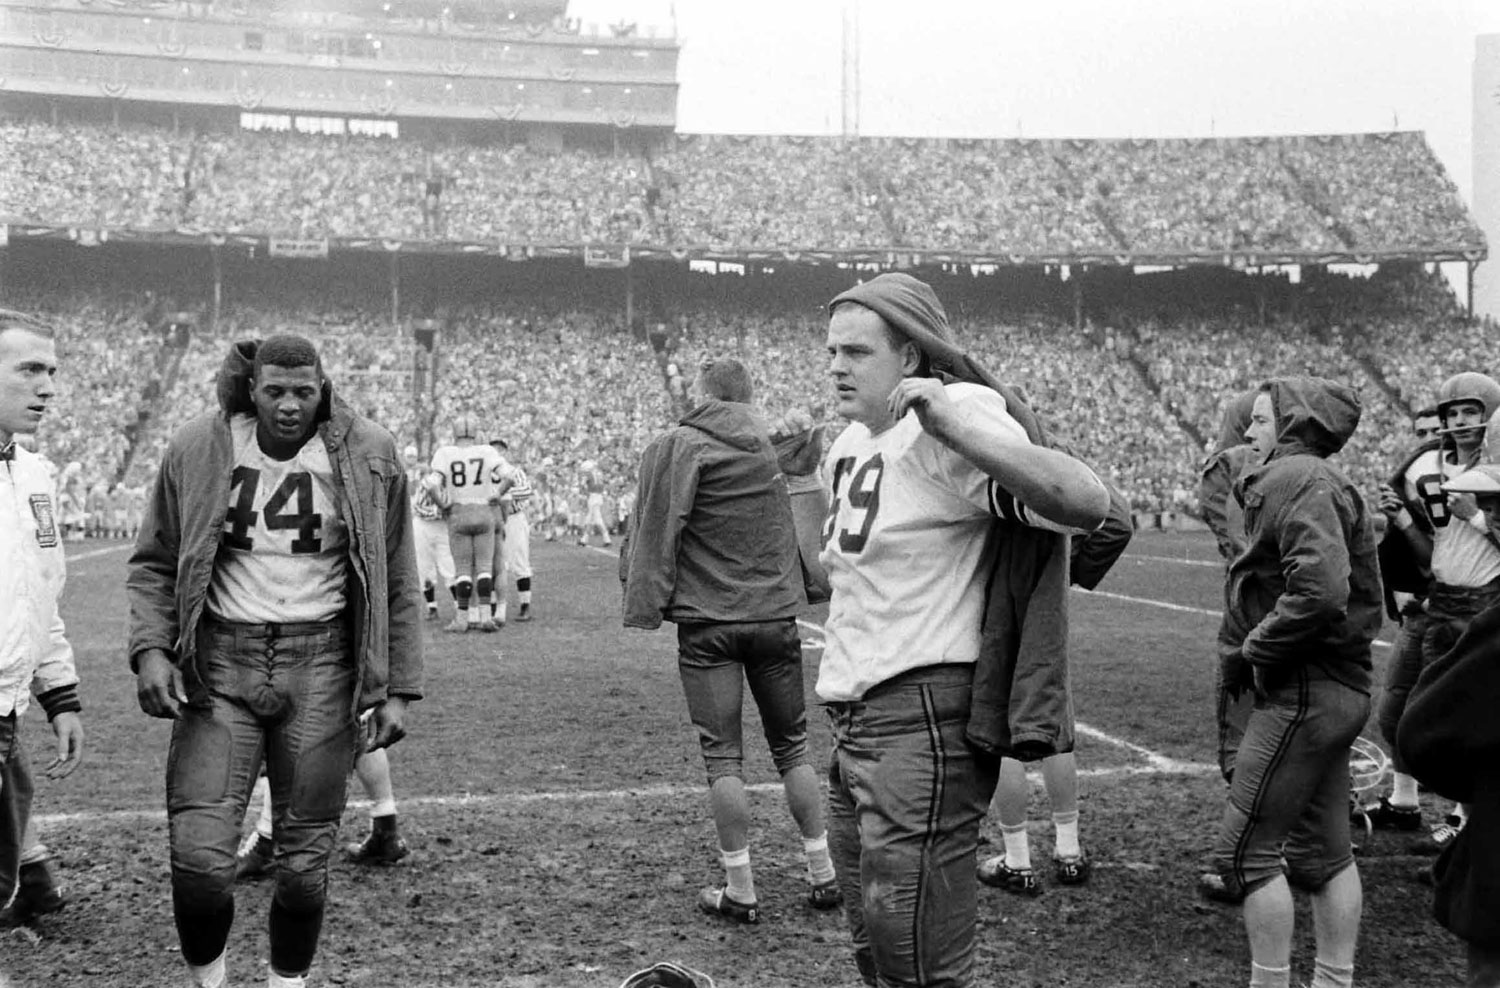 Syracuse vs. Texas, 1960 Cotton Bowl. At left is the great Ernie Davis (#44) -- the first African American to win the Heisman.